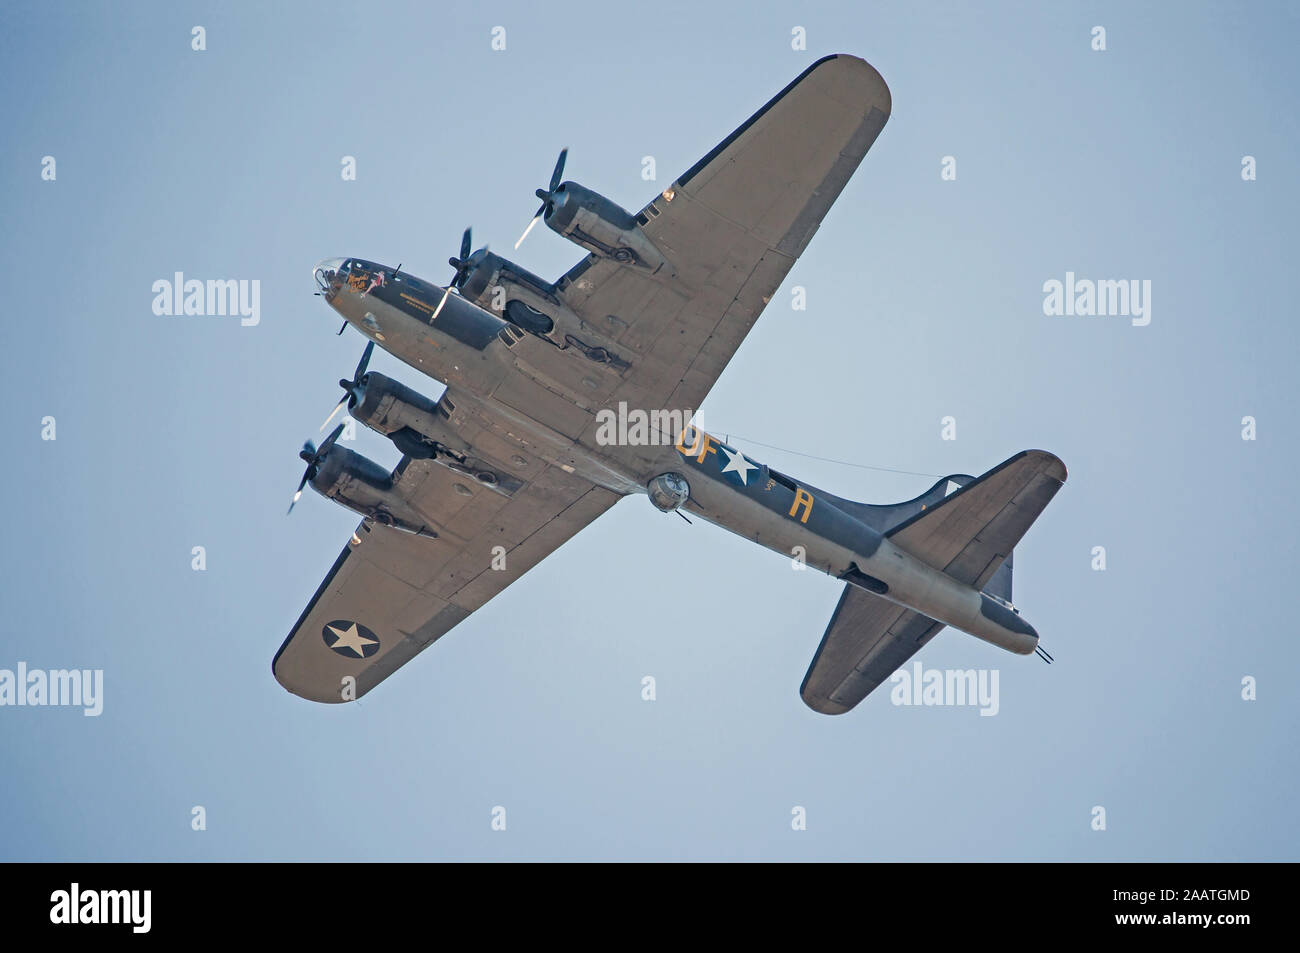 MONROE, NC (USA) - November 9, 2019:  A B-17 bomber used in the filming of the movie 'Memphis Belle' flies overhead at an air show. Stock Photo